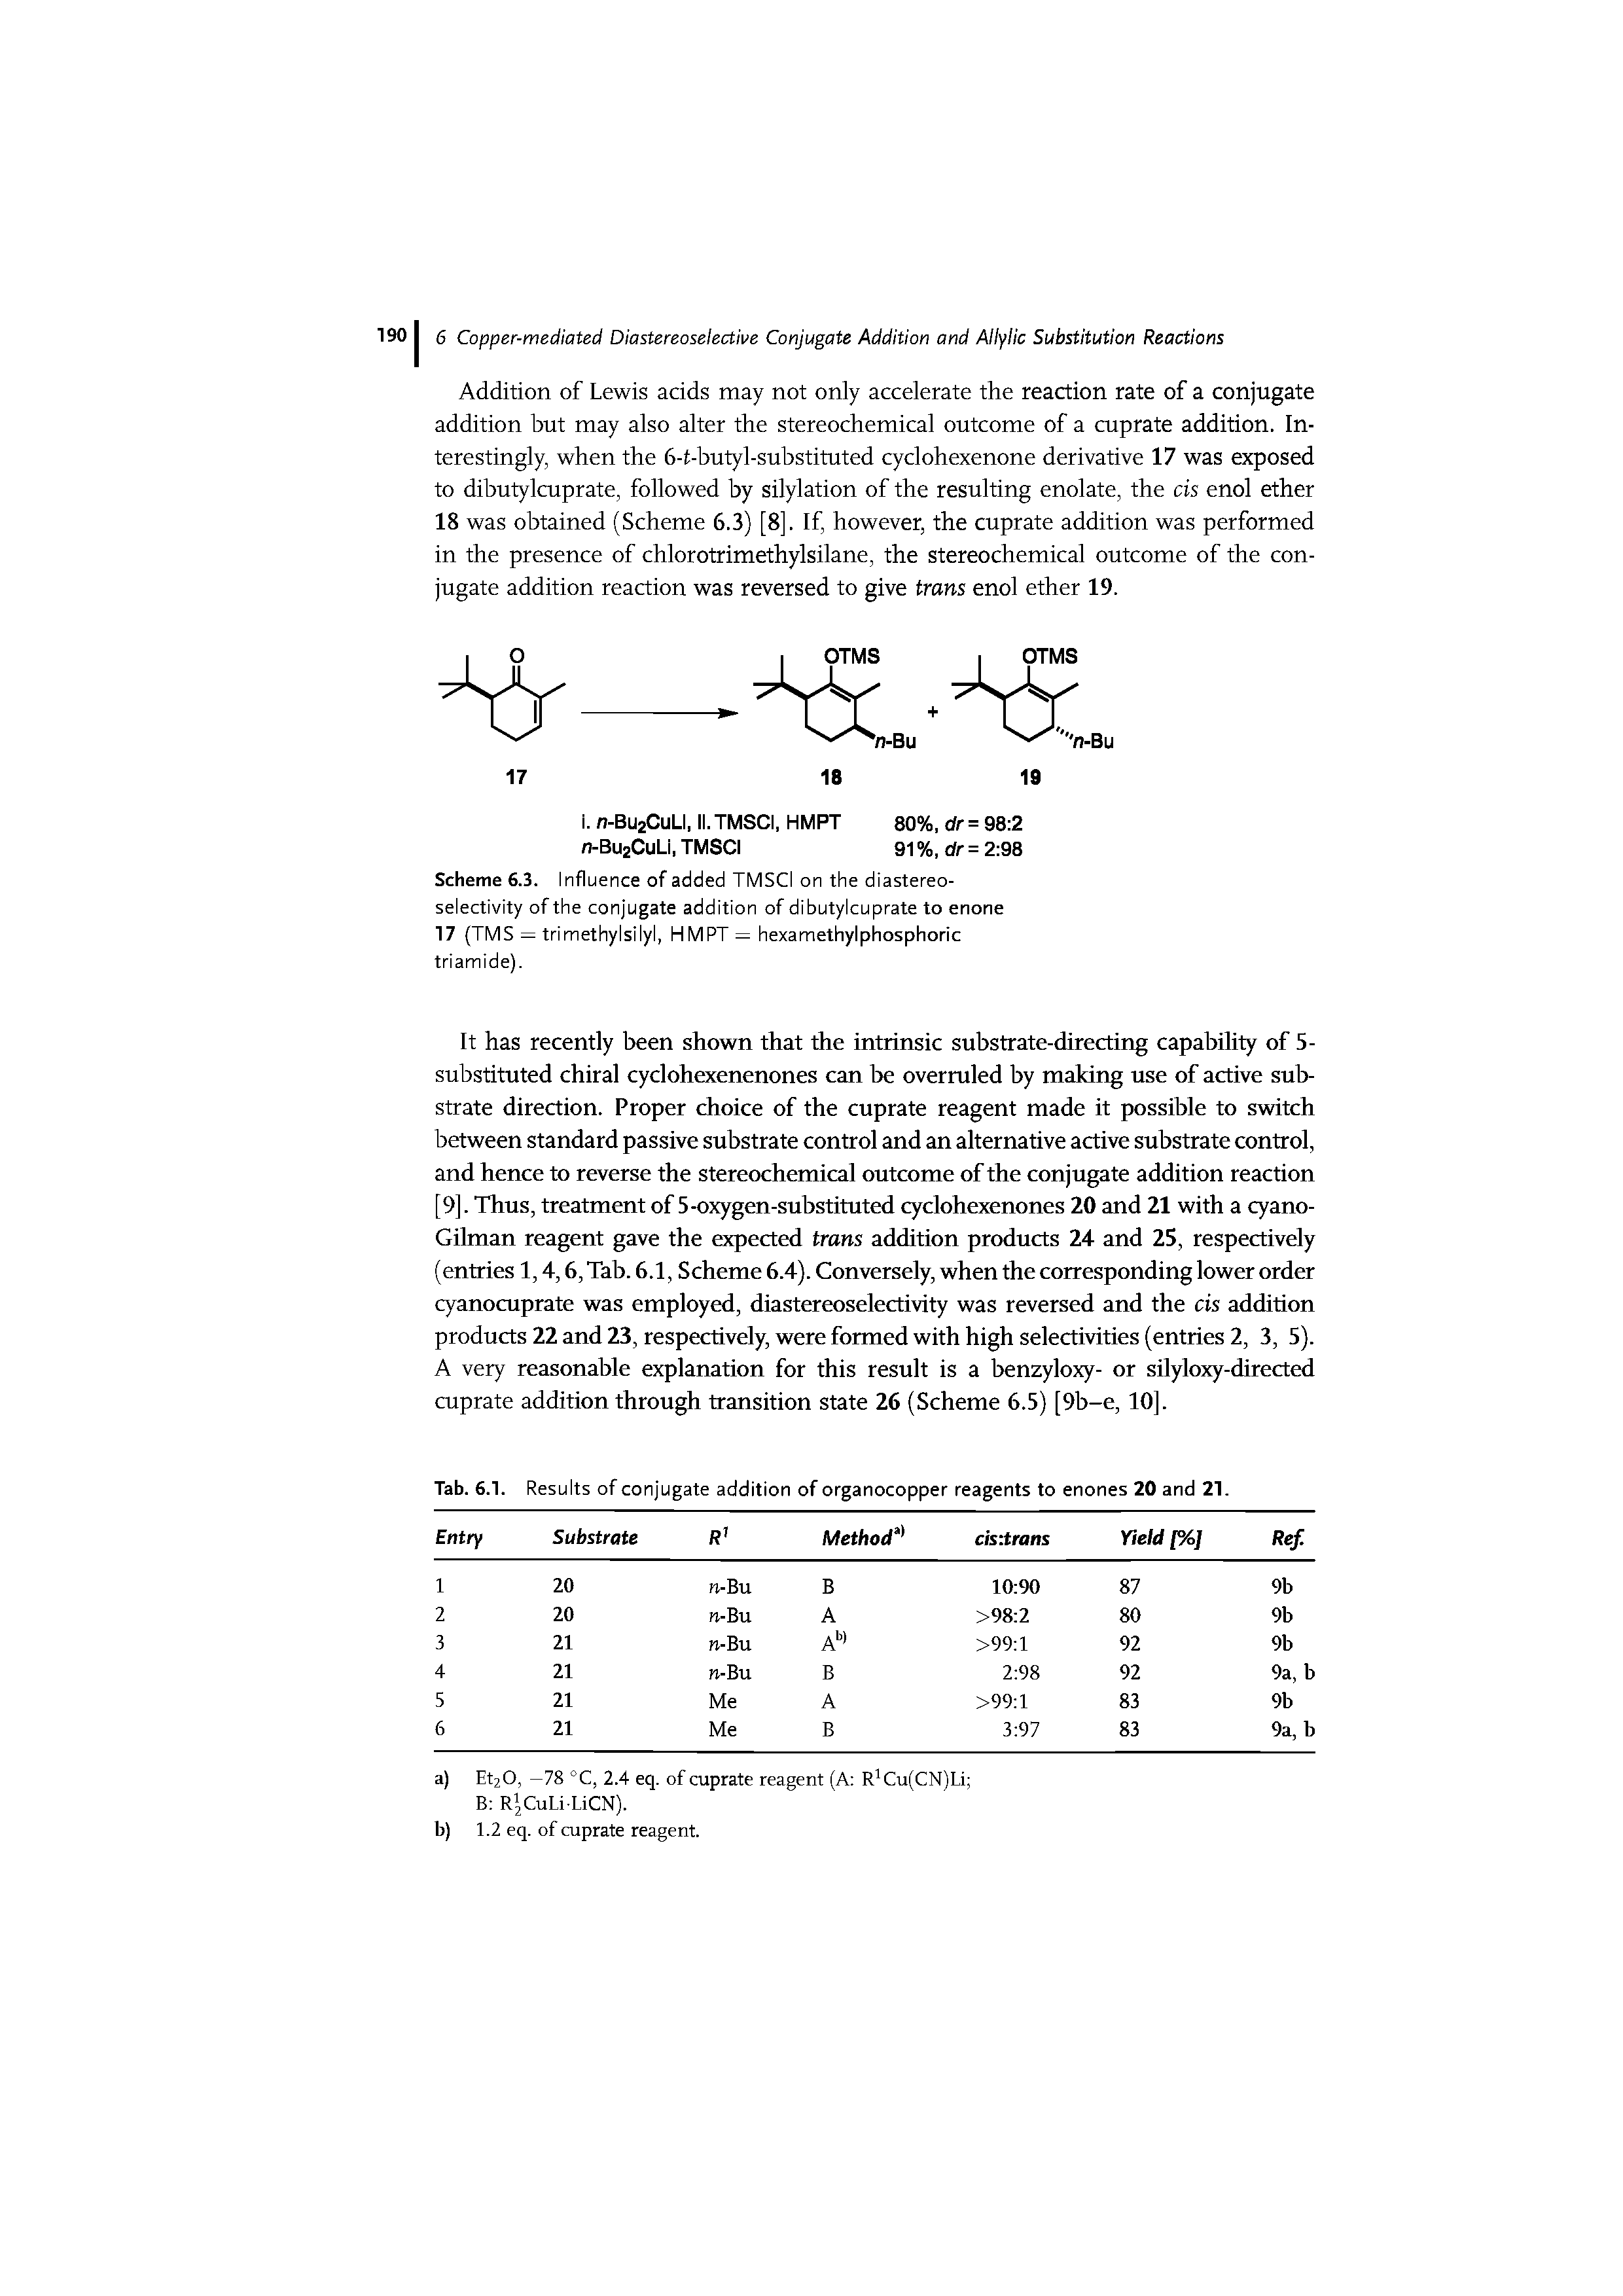 Tab. 6.1. Results of conjugate addition of organocopper reagents to enones 20 and 21.